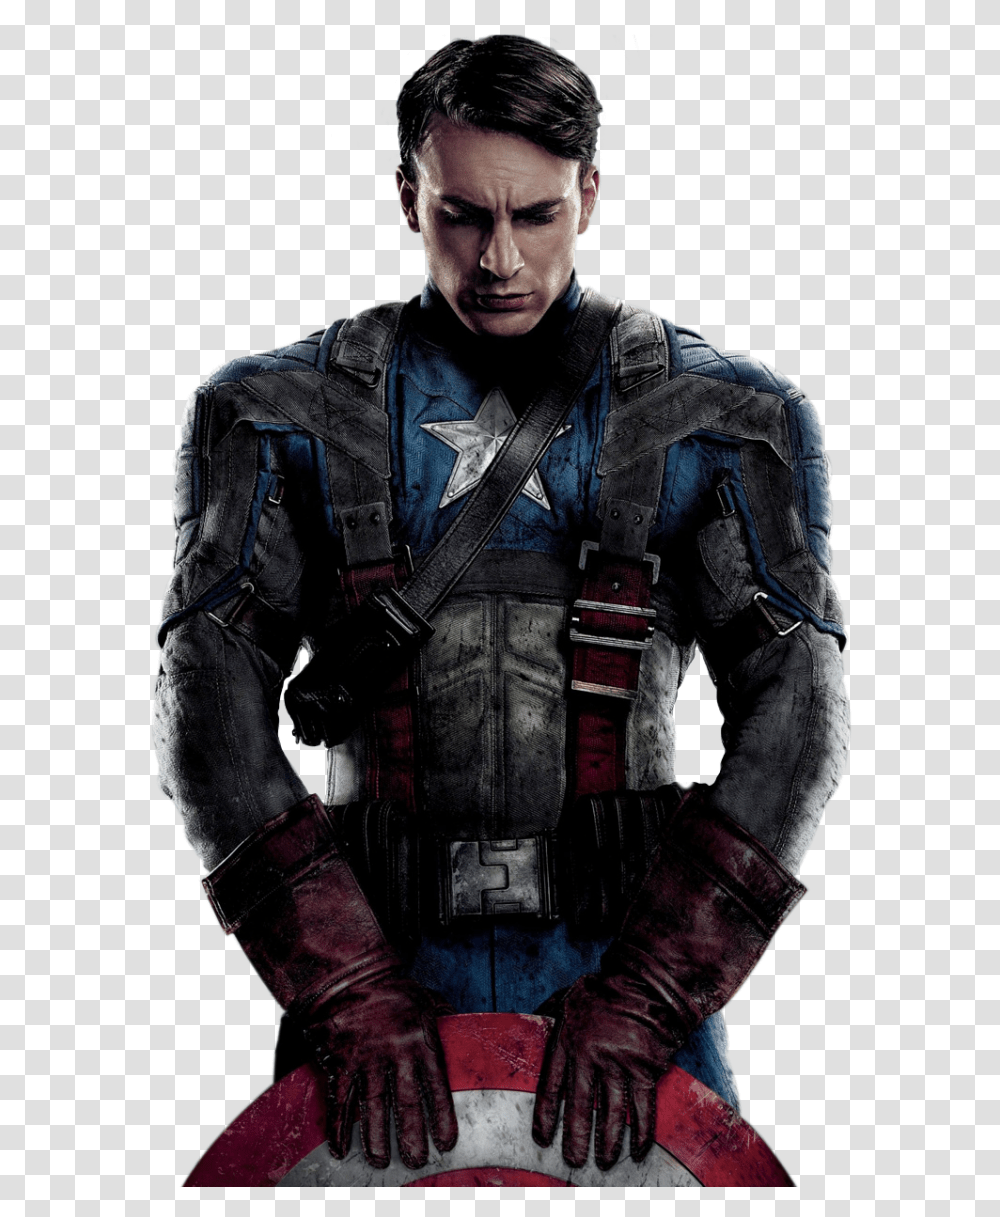 Captain America Front Thinking Iphone Captain America Wallpaper Hd, Jacket, Coat, Clothing, Apparel Transparent Png